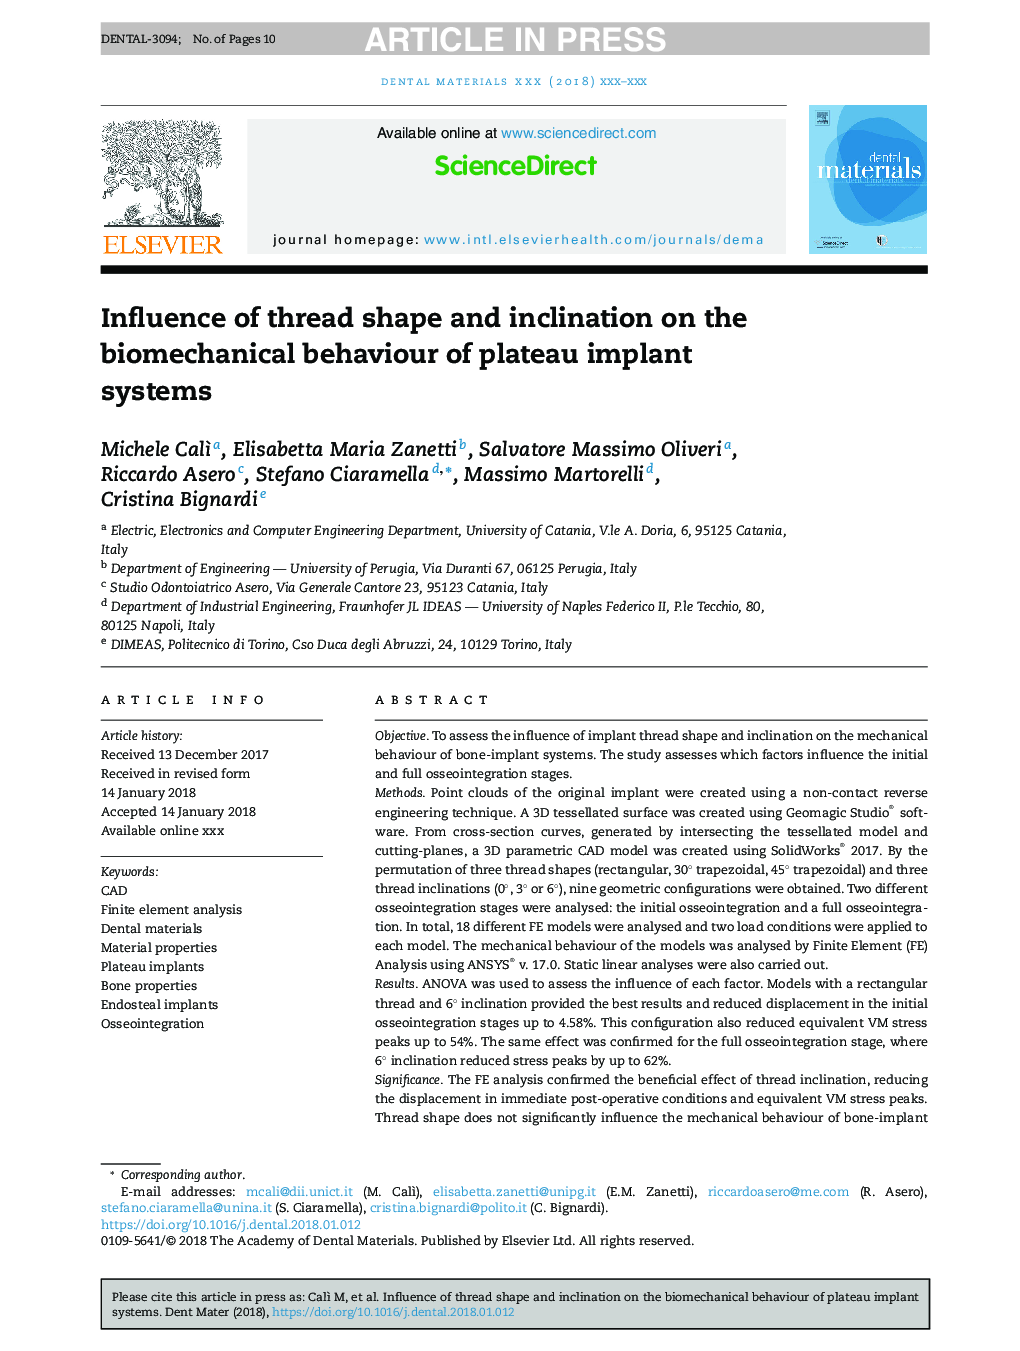 Influence of thread shape and inclination on the biomechanical behaviour of plateau implant systems